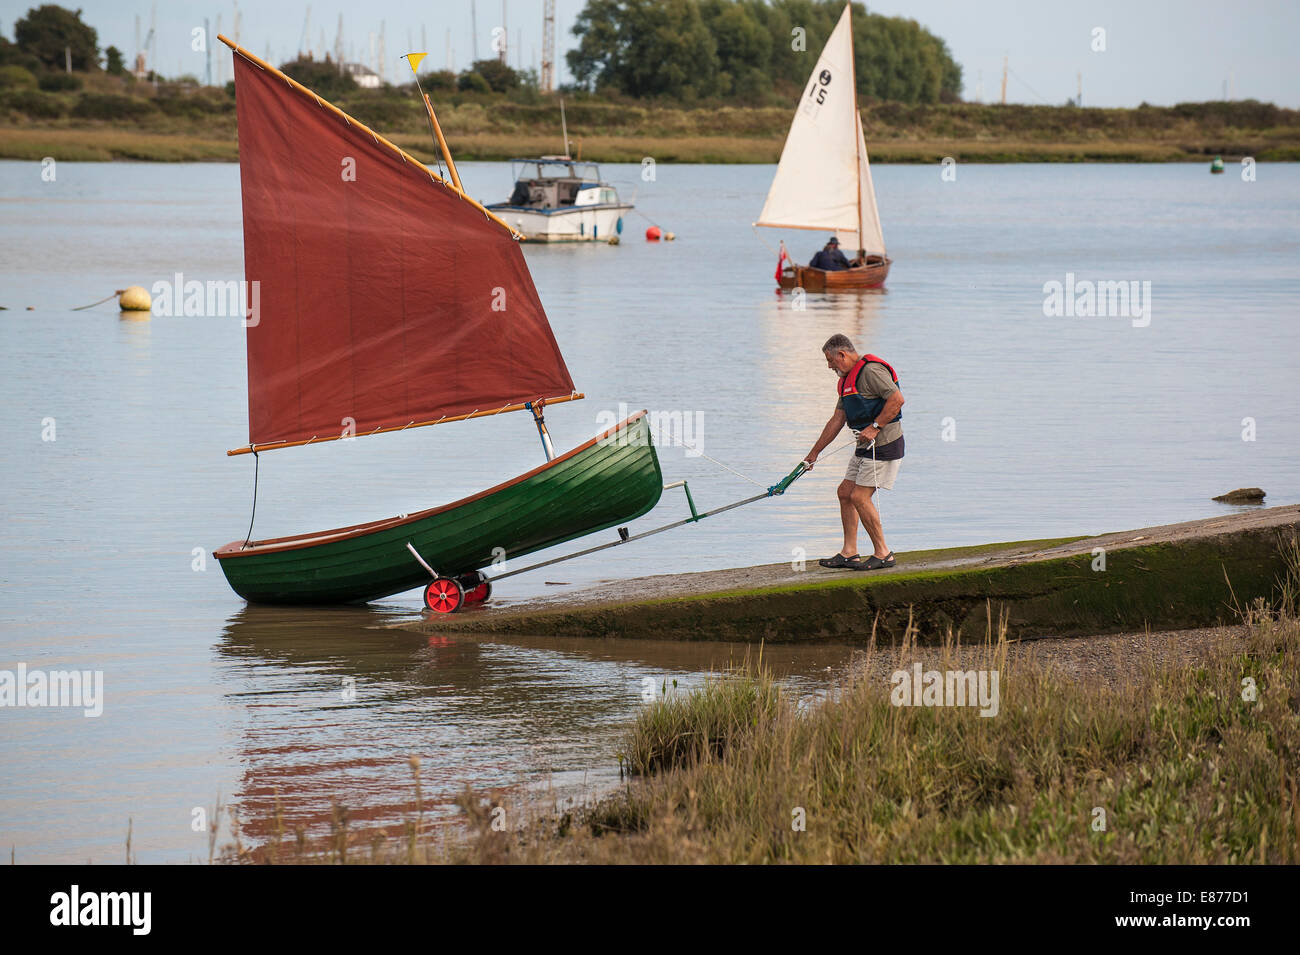 A man launching a Heybridge Roach dinghy on the Blackwater River in Essex. Stock Photo